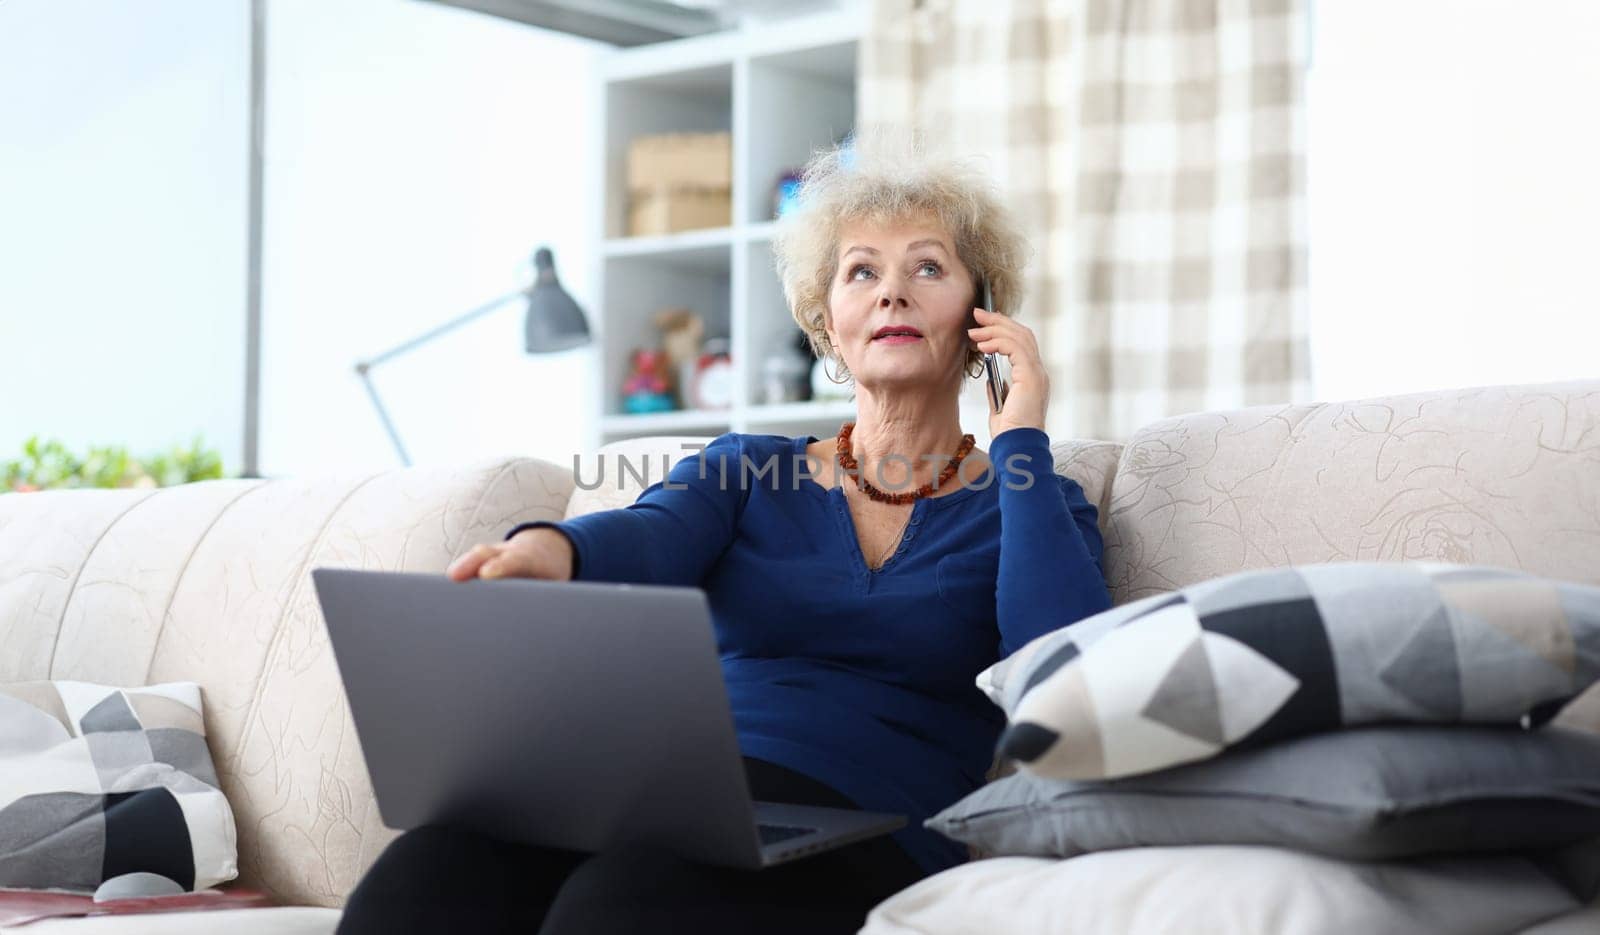 Woman talking on phone with laptop on her lap. Dont forget your parents concept